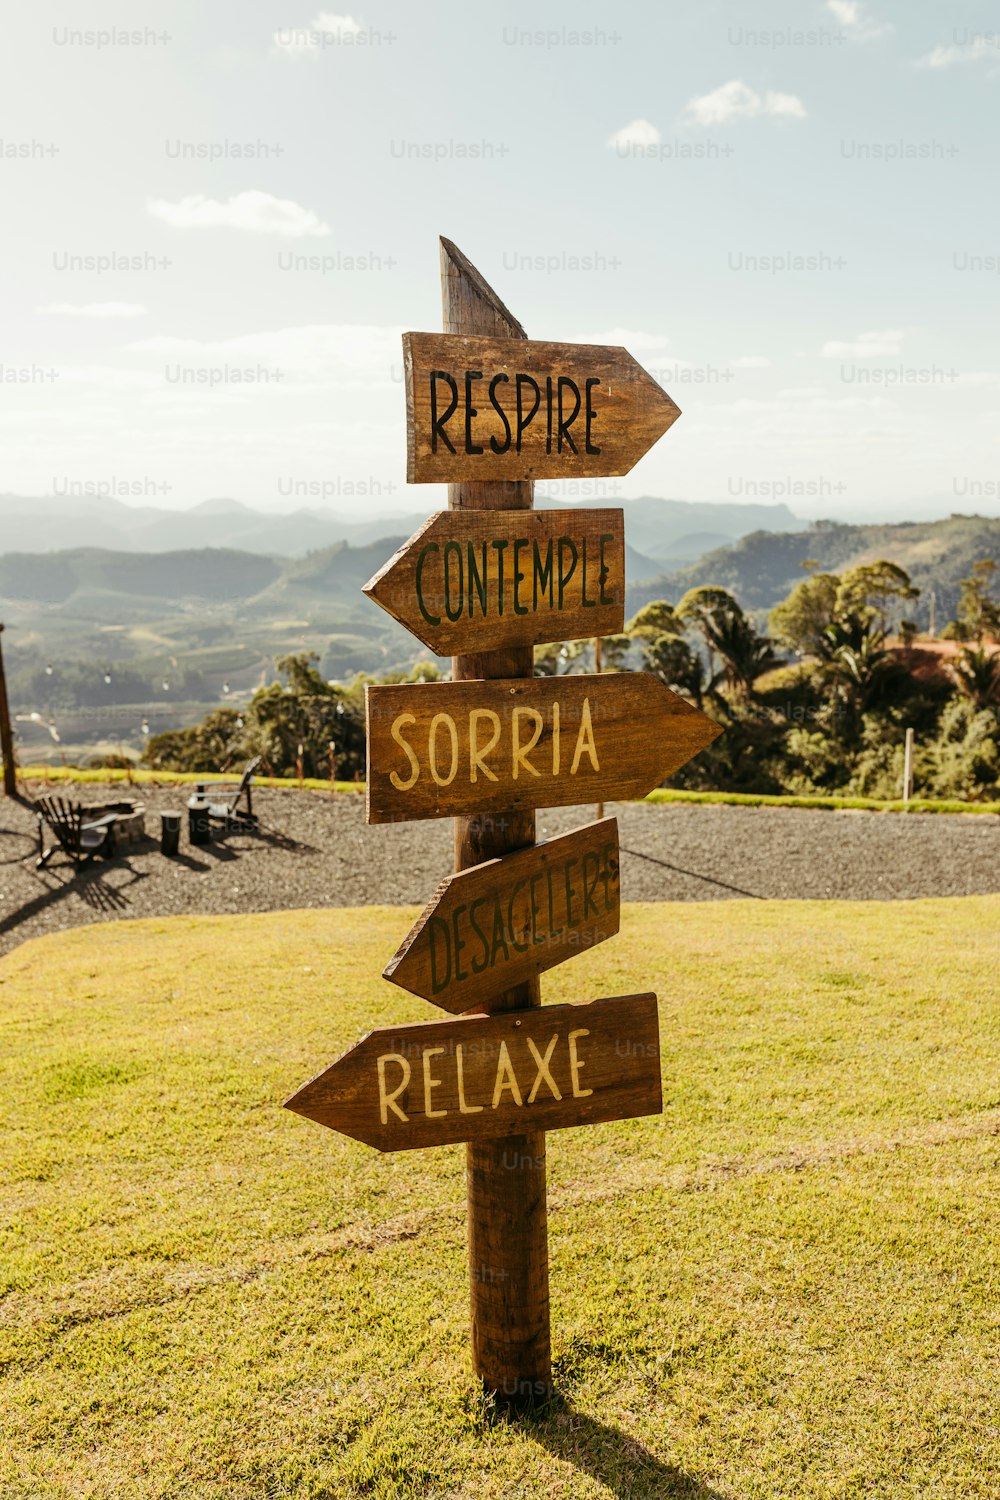 a wooden sign pointing in different directions